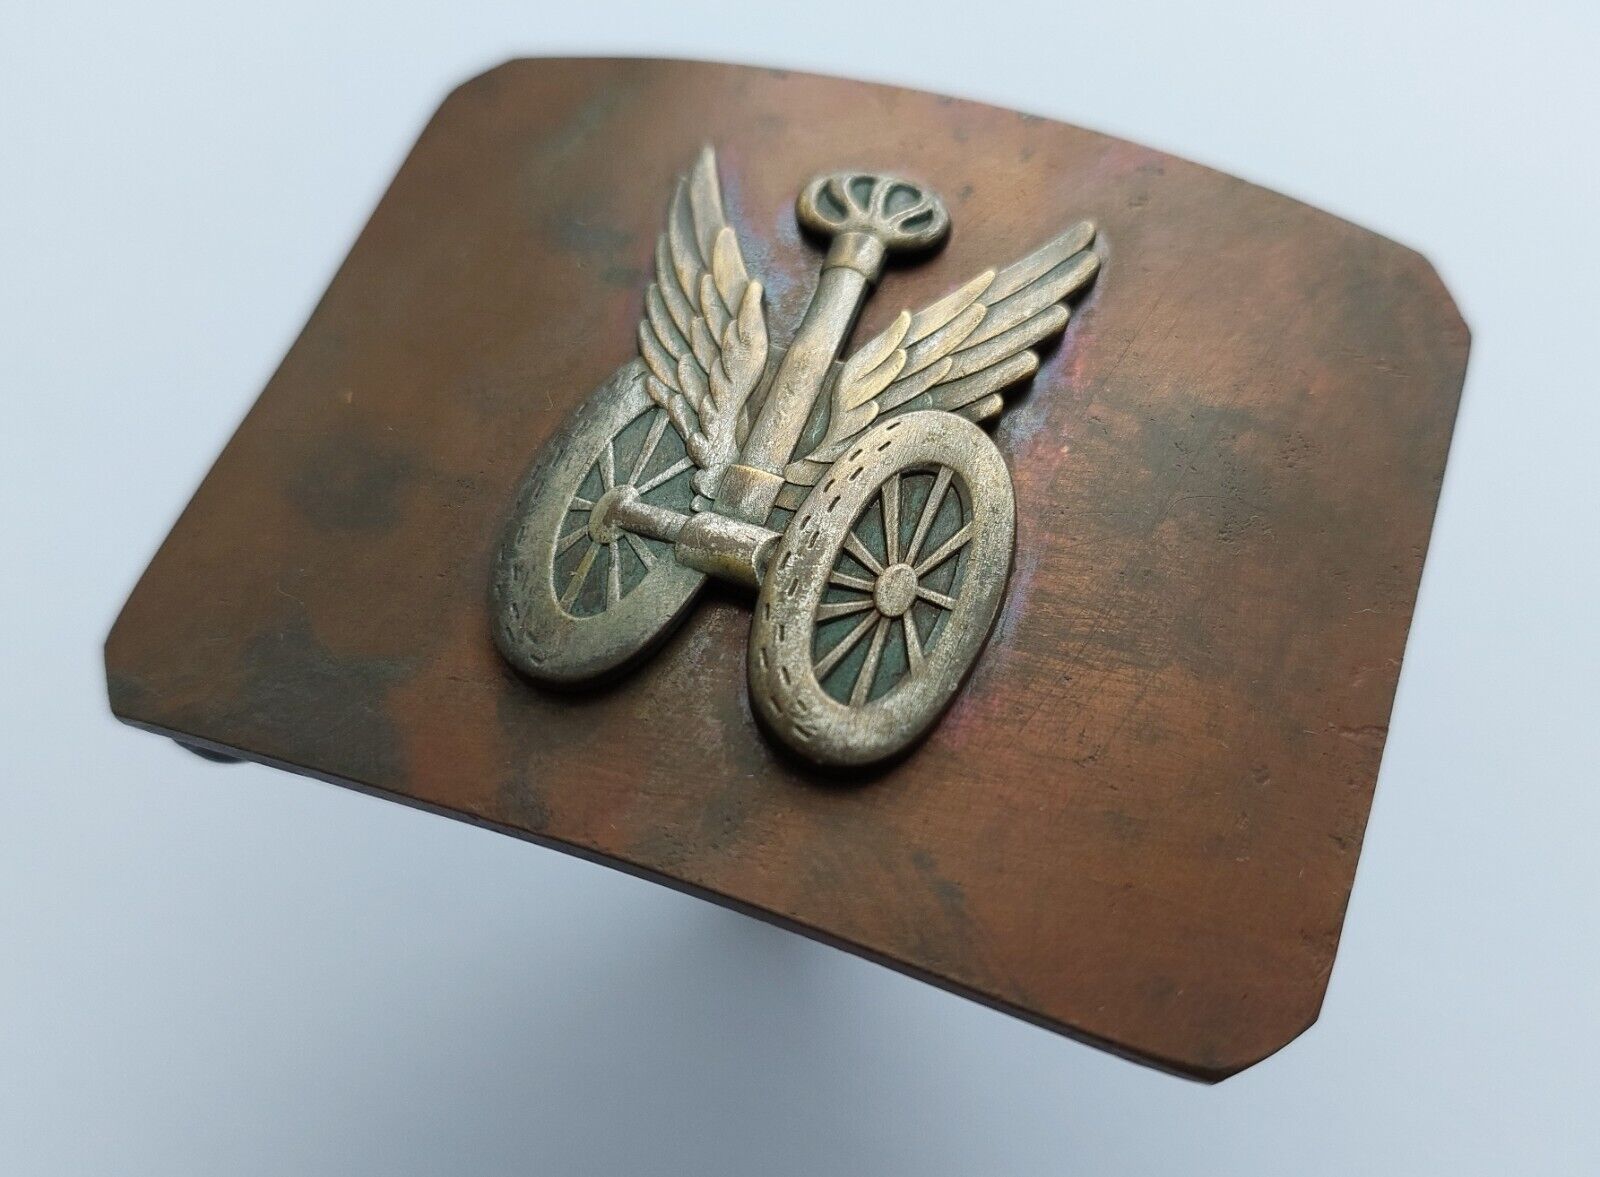 Extremely Rare Russian Belt Buckle WWI WW1 Motor Transport Troops Insignia relic